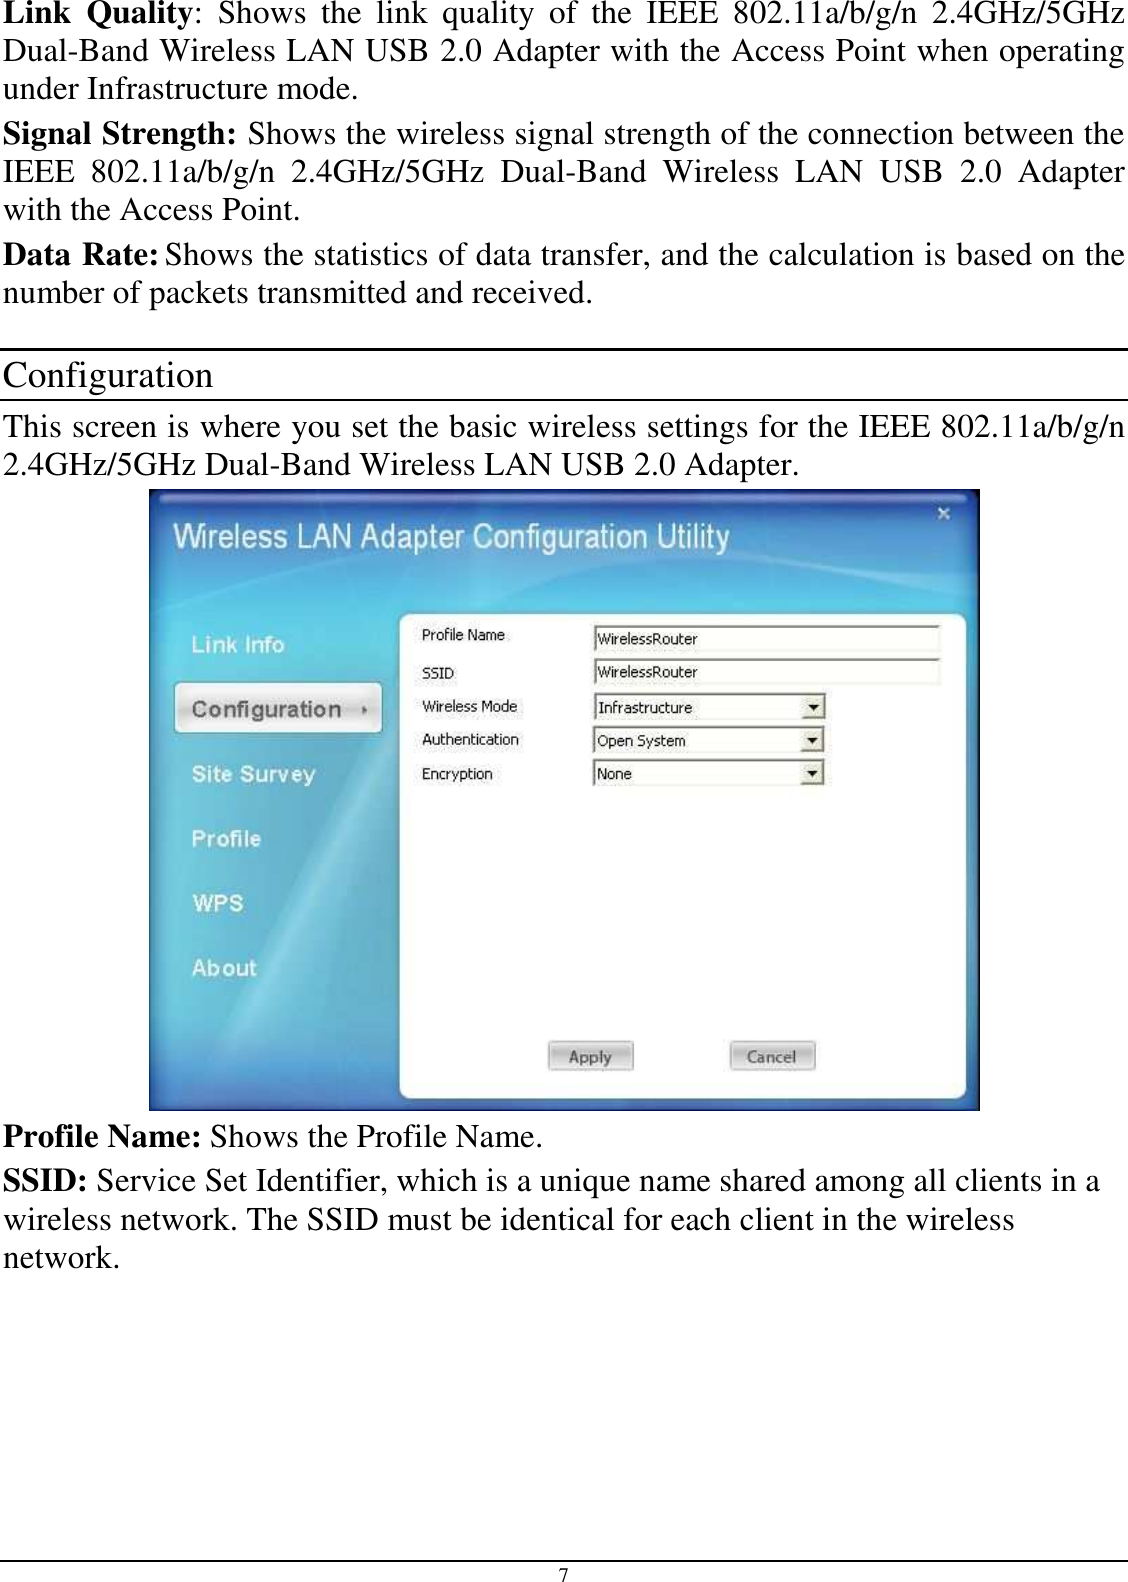 7 Link  Quality:  Shows  the  link  quality  of  the  IEEE  802.11a/b/g/n  2.4GHz/5GHz Dual-Band Wireless LAN USB 2.0 Adapter with the Access Point when operating under Infrastructure mode. Signal Strength: Shows the wireless signal strength of the connection between the  IEEE  802.11a/b/g/n  2.4GHz/5GHz  Dual-Band  Wireless  LAN  USB  2.0  Adapter with the Access Point. Data Rate: Shows the statistics of data transfer, and the calculation is based on the number of packets transmitted and received.  Configuration This screen is where you set the basic wireless settings for the IEEE 802.11a/b/g/n 2.4GHz/5GHz Dual-Band Wireless LAN USB 2.0 Adapter.   Profile Name: Shows the Profile Name. SSID: Service Set Identifier, which is a unique name shared among all clients in a wireless network. The SSID must be identical for each client in the wireless network. 